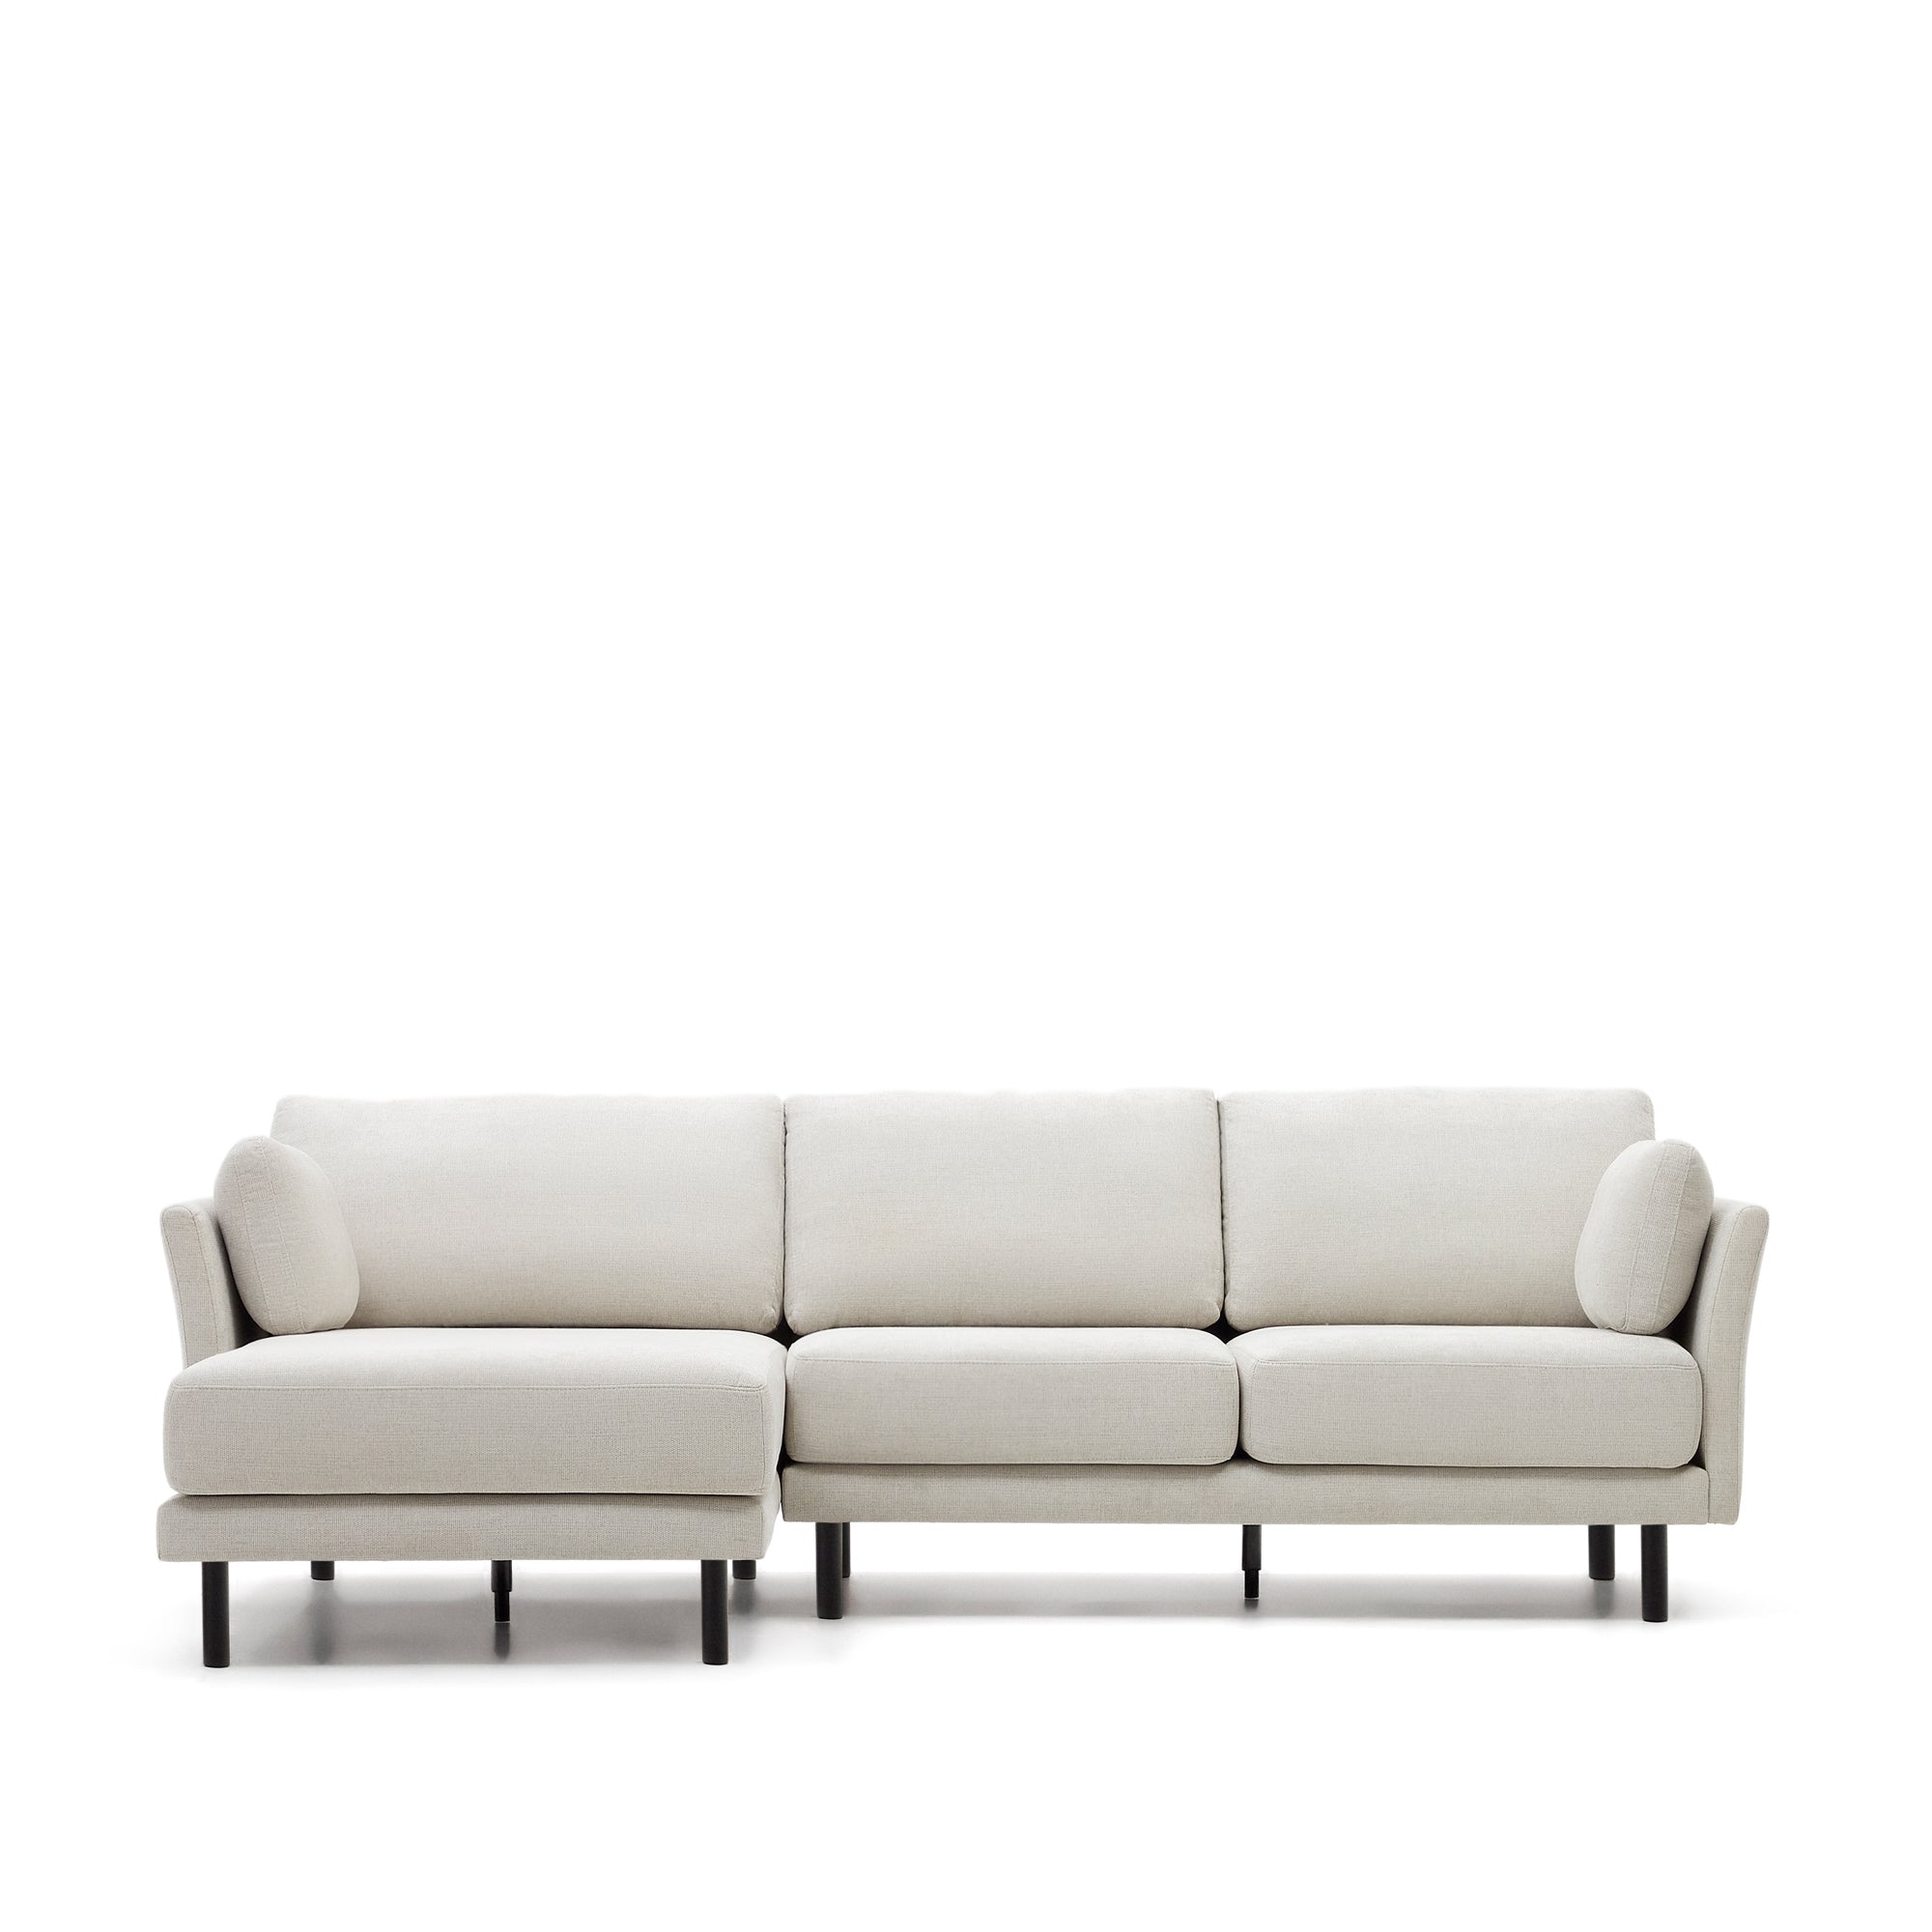 Gilma 3 seater sofa w/ right/left-hand chaise longue, chenille pearl with black legs, 260 cm